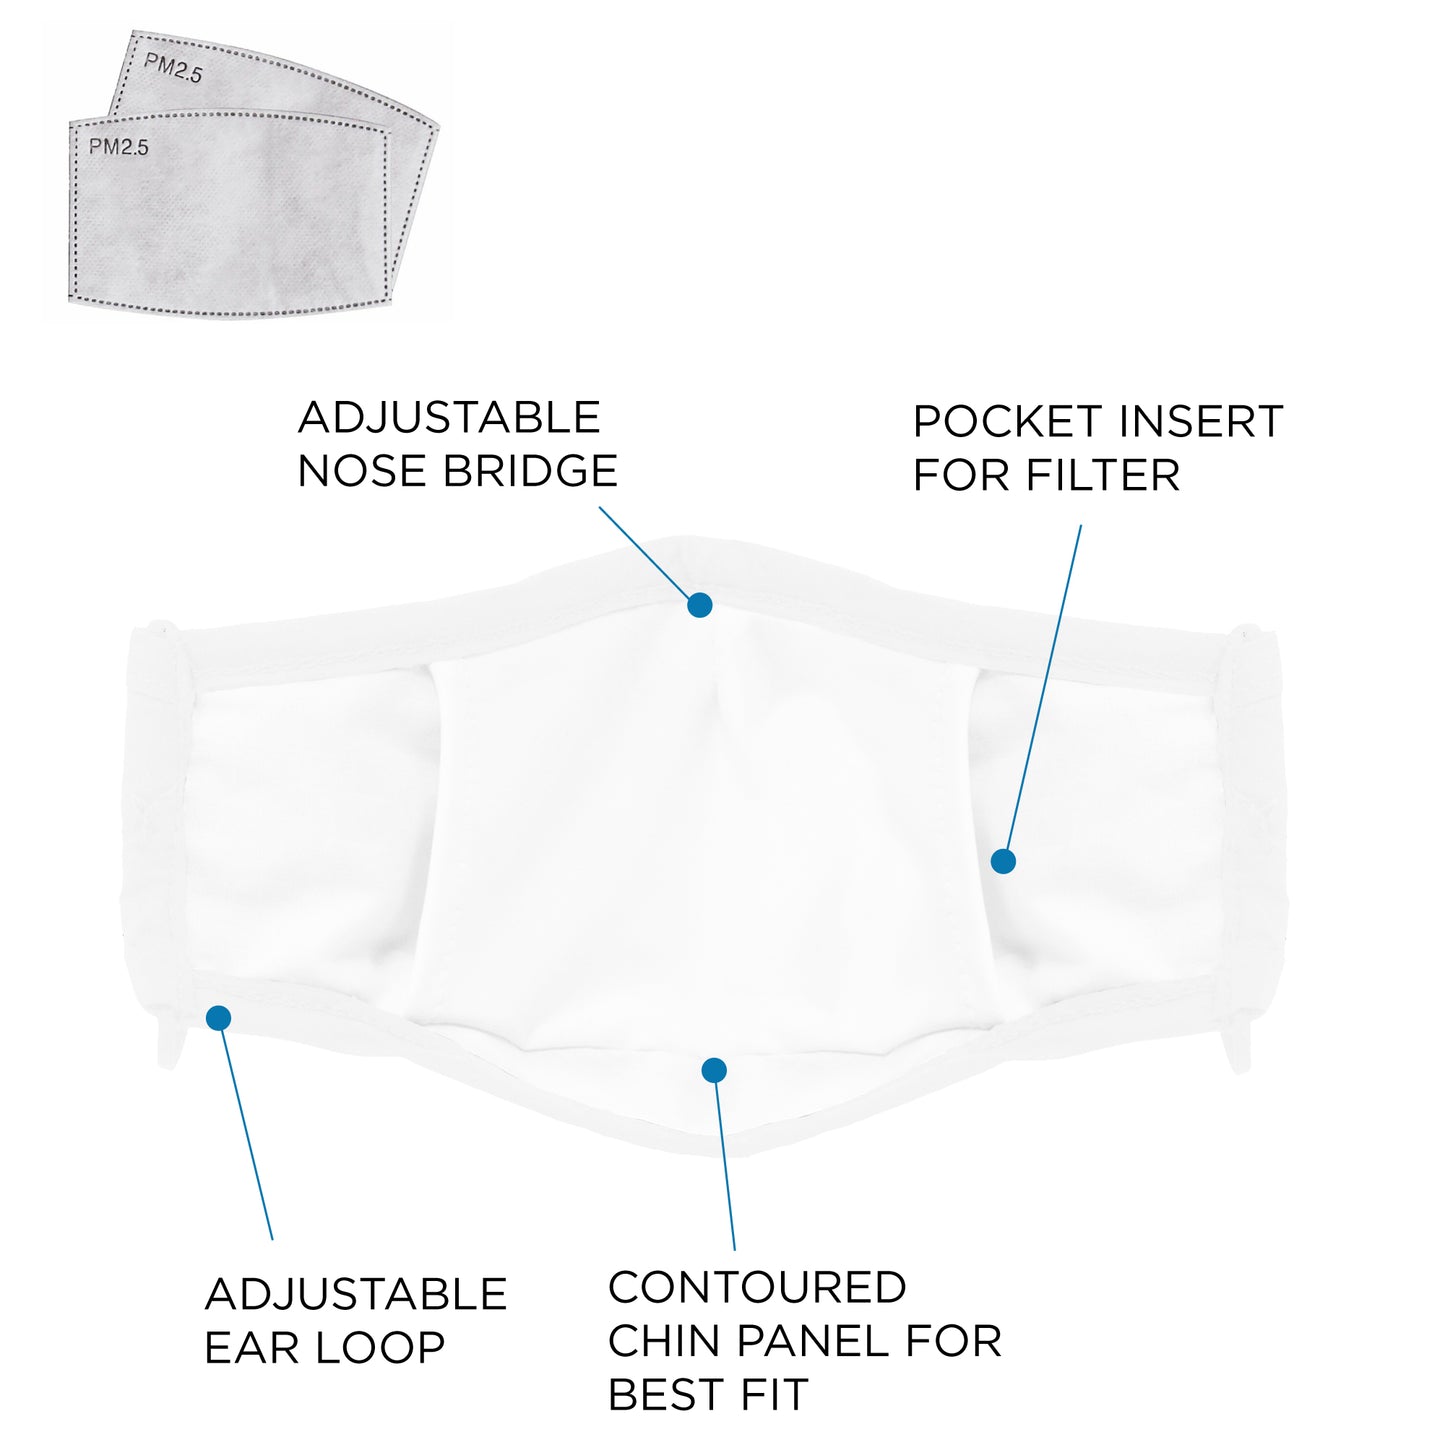 DALIX Cloth Face Mask 3 Layer Filter Pocket Adjustable Nose Ear Loops S/M with Filter- 3 Pack